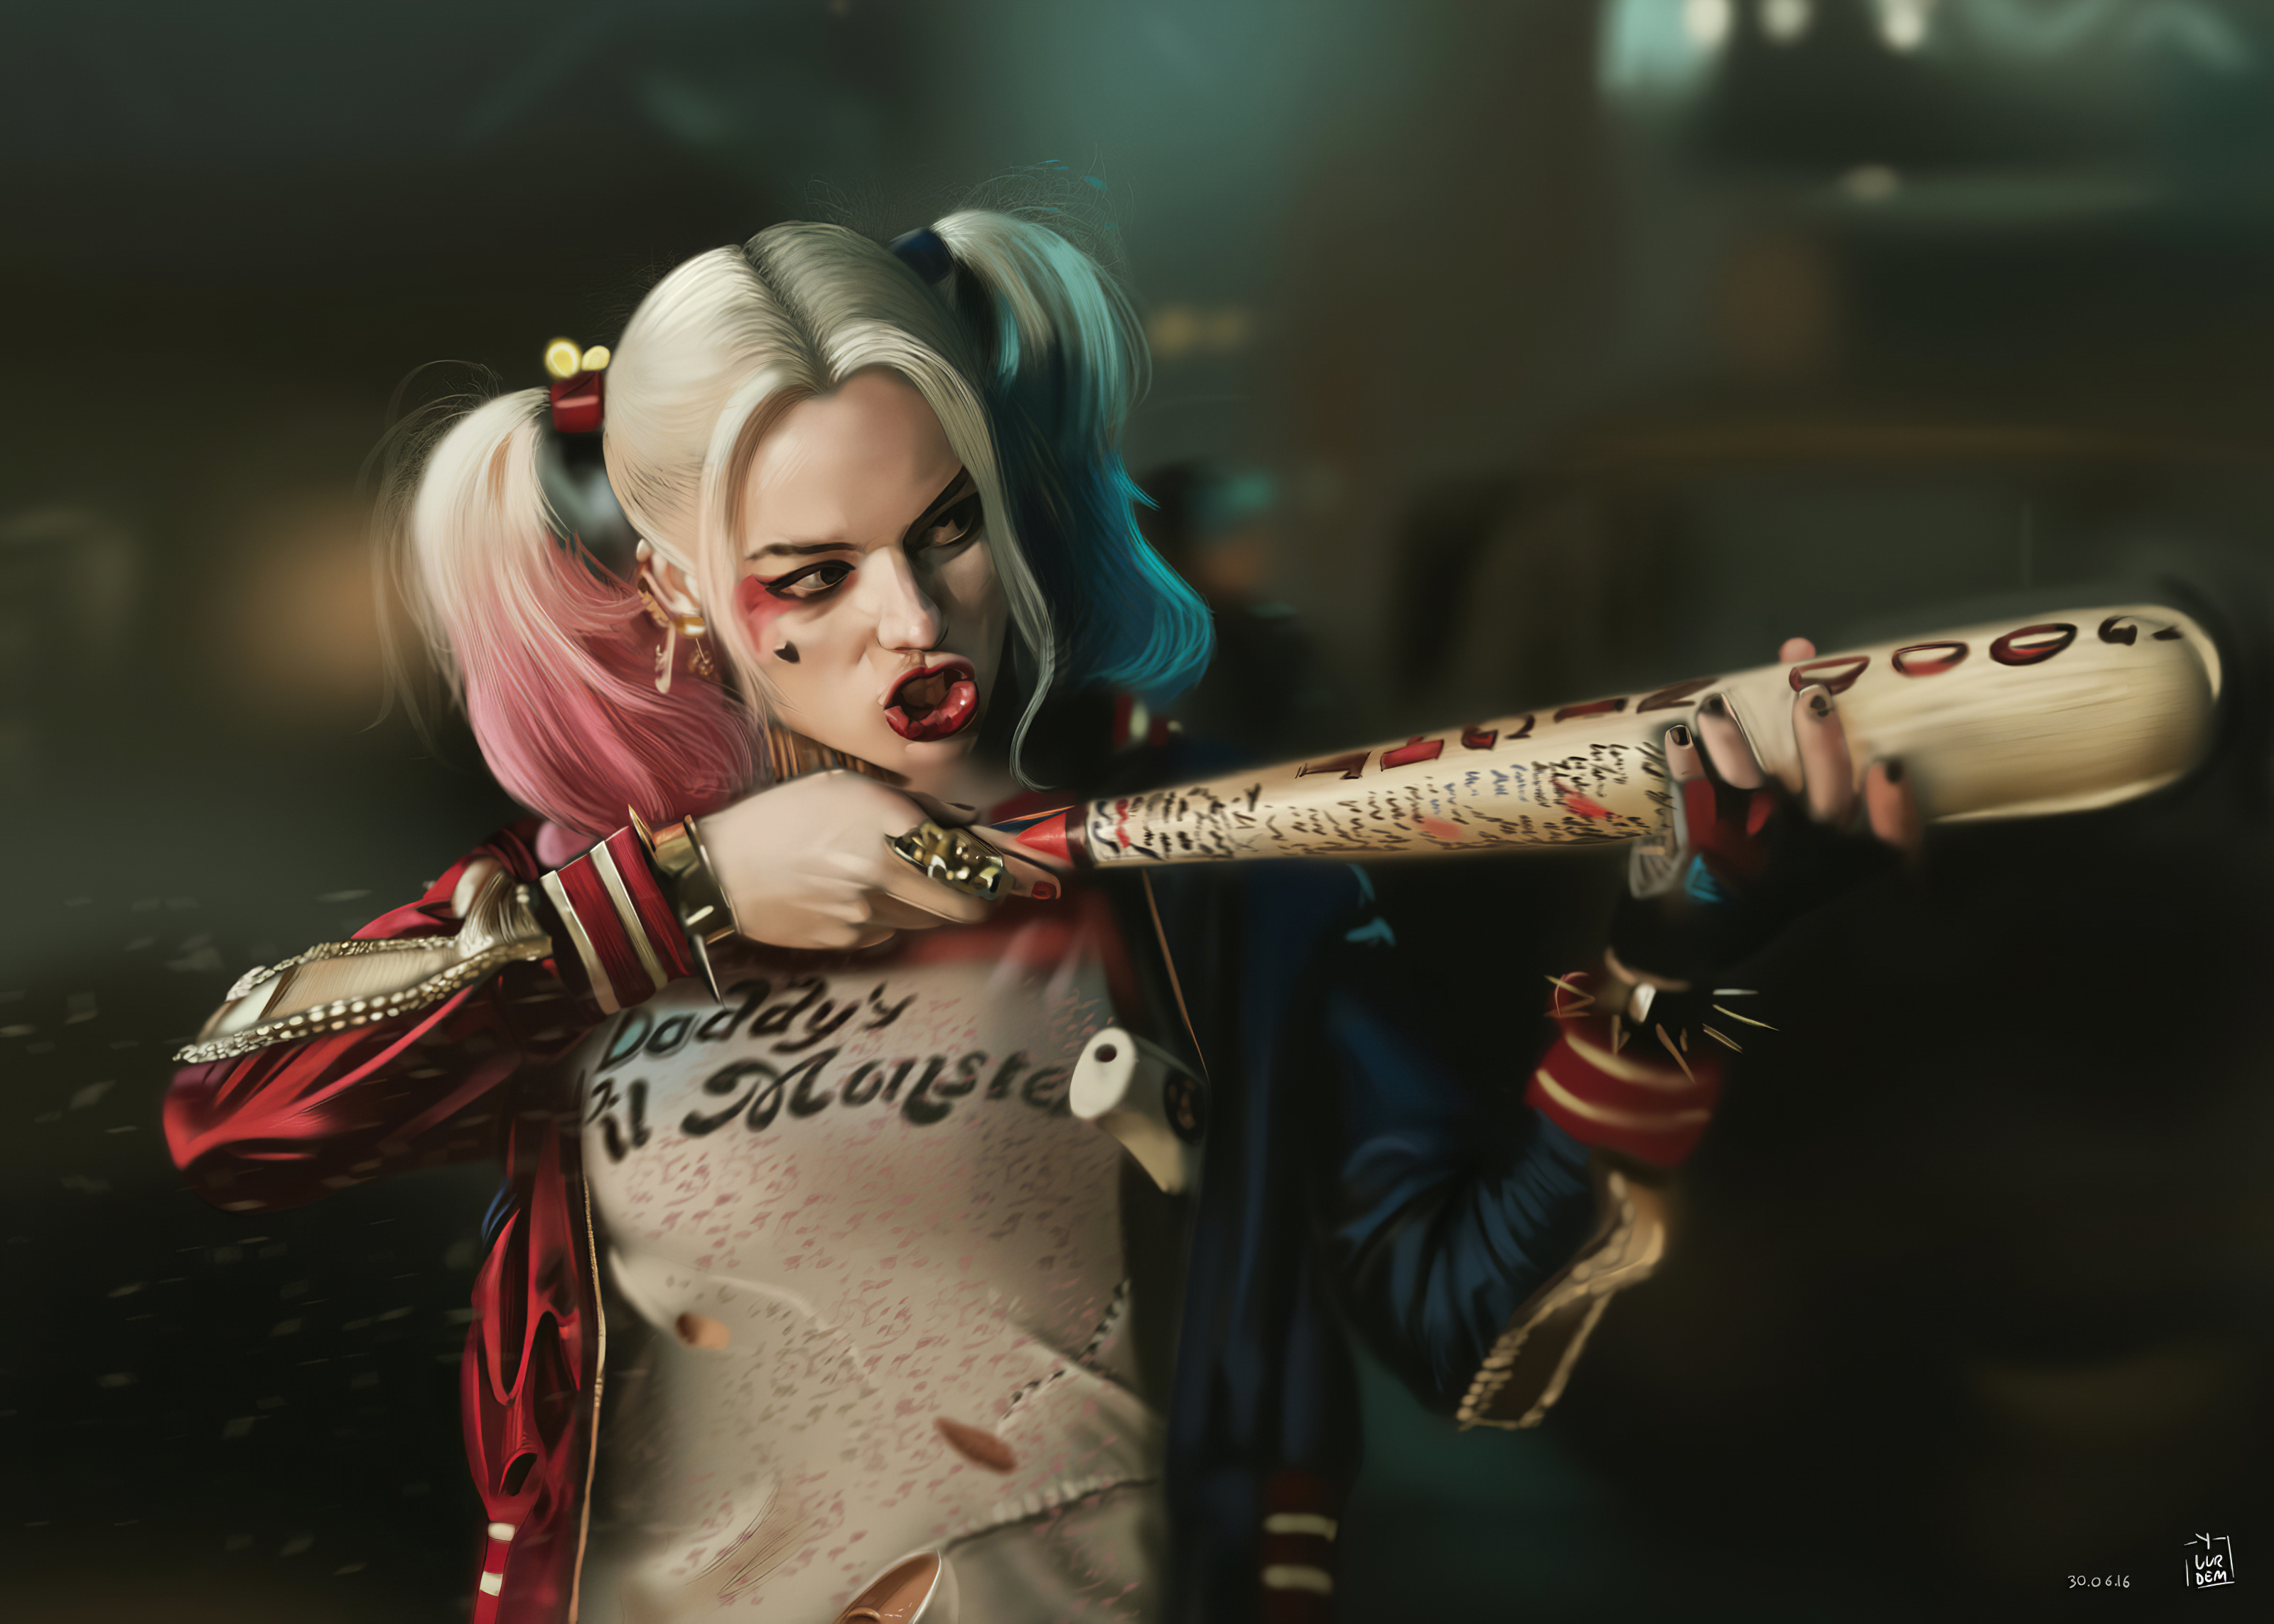 140+ Suicide Squad HD Wallpapers and Backgrounds